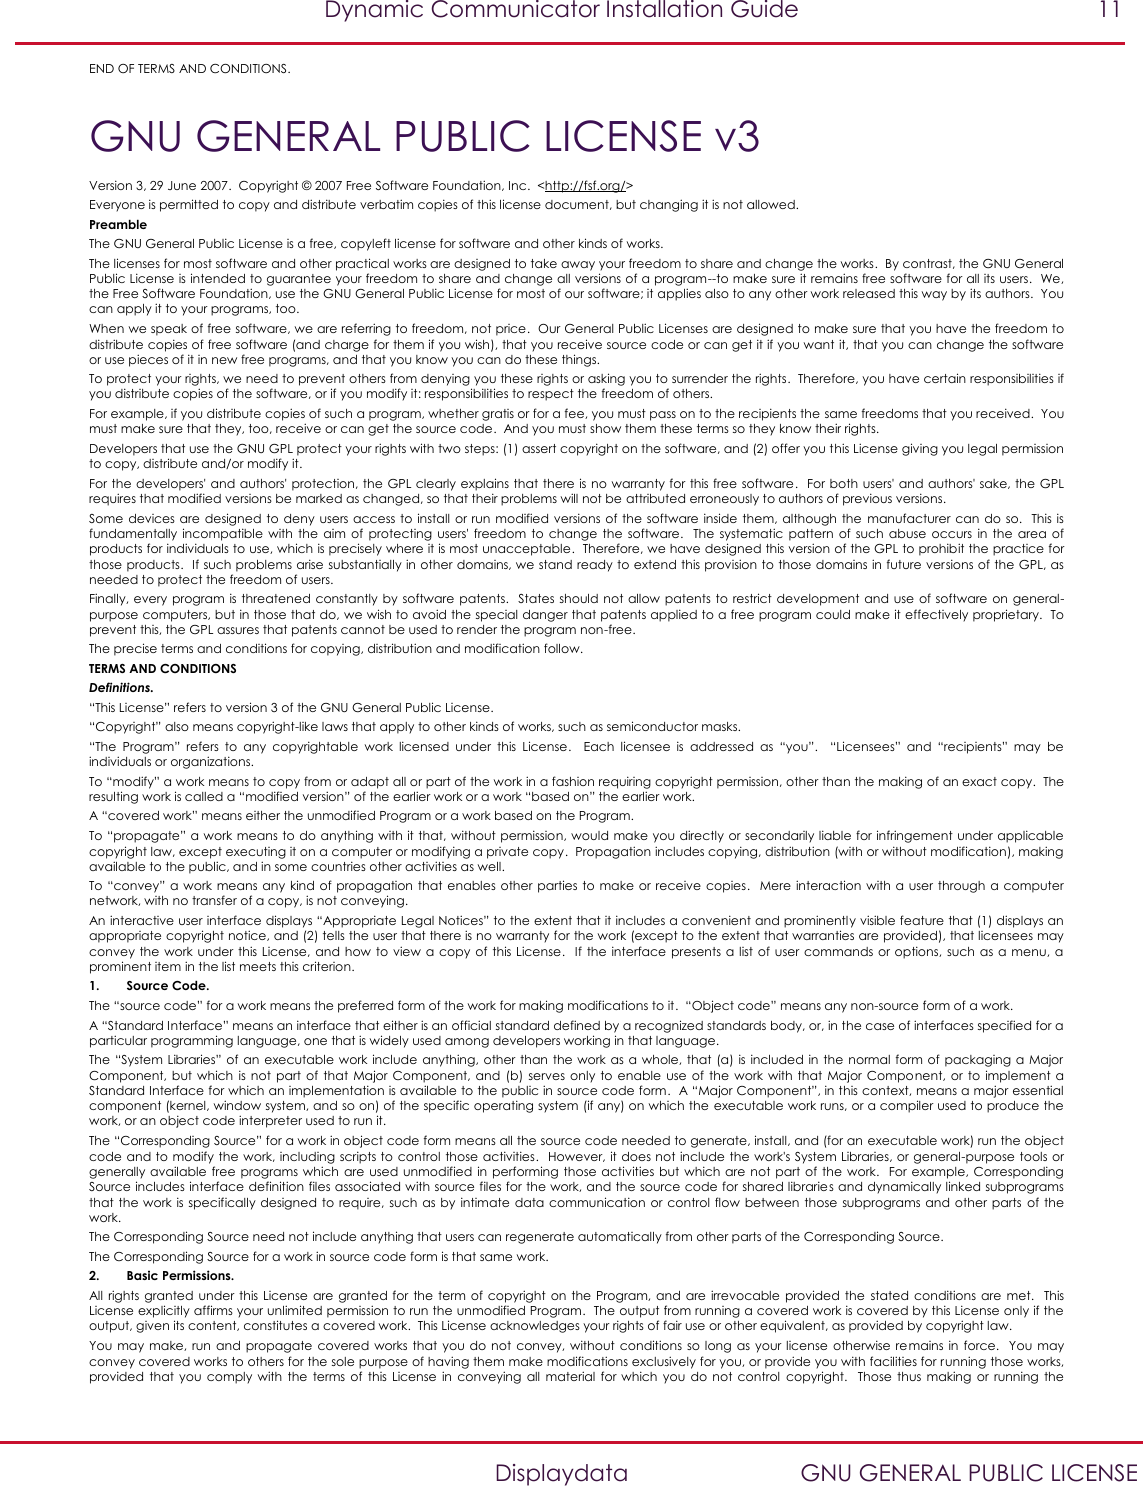   Dynamic Communicator Installation Guide  11    Displaydata  GNU GENERAL PUBLIC LICENSE END OF TERMS AND CONDITIONS. GNU GENERAL PUBLIC LICENSE v3 Version 3, 29 June 2007.  Copyright © 2007 Free Software Foundation, Inc.  &lt;http://fsf.org/&gt; Everyone is permitted to copy and distribute verbatim copies of this license document, but changing it is not allowed. Preamble The GNU General Public License is a free, copyleft license for software and other kinds of works. The licenses for most software and other practical works are designed to take away your freedom to share and change the works.  By contrast, the GNU General Public License is intended to guarantee your freedom to share and change all versions of a program--to make sure it remains free software for all its users.  We, the Free Software Foundation, use the GNU General Public License for most of our software; it applies also to any other work released this way by its authors.  You can apply it to your programs, too. When we speak of free software, we are referring to freedom, not price.  Our General Public Licenses are designed to make sure that you have the freedom to distribute copies of free software (and charge for them if you wish), that you receive source code or can get it if you want it, that you can change the software or use pieces of it in new free programs, and that you know you can do these things. To protect your rights, we need to prevent others from denying you these rights or asking you to surrender the rights.  Therefore, you have certain responsibilities if you distribute copies of the software, or if you modify it: responsibilities to respect the freedom of others. For example, if you distribute copies of such a program, whether gratis or for a fee, you must pass on to the recipients the same freedoms that you received.  You must make sure that they, too, receive or can get the source code.  And you must show them these terms so they know their rights. Developers that use the GNU GPL protect your rights with two steps: (1) assert copyright on the software, and (2) offer you this License giving you legal permission to copy, distribute and/or modify it. For the developers&apos; and authors&apos; protection, the GPL clearly explains that there is no warranty for this free software.  For both users&apos; and authors&apos; sake, the GPL requires that modified versions be marked as changed, so that their problems will not be attributed erroneously to authors of previous versions. Some devices are designed to  deny users access to  install or run modified versions of the software inside them,  although the  manufacturer can  do so.    This is fundamentally  incompatible  with the  aim of  protecting users&apos;  freedom  to change  the  software.   The systematic  pattern of  such abuse  occurs in  the area  of products for individuals to use, which is precisely where it is most unacceptable.  Therefore, we have designed this version of the GPL to prohibit the practice for those products.  If such problems arise substantially in other domains, we stand ready to extend this provision to those domains in future versions of the GPL, as needed to protect the freedom of users. Finally, every program is threatened constantly by software patents.  States  should not allow patents to restrict development and  use  of  software on general-purpose computers, but in those that do, we wish to avoid the special danger that patents applied to a free program could make it effectively proprietary.  To prevent this, the GPL assures that patents cannot be used to render the program non-free. The precise terms and conditions for copying, distribution and modification follow. TERMS AND CONDITIONS Definitions. “This License” refers to version 3 of the GNU General Public License. “Copyright” also means copyright-like laws that apply to other kinds of works, such as semiconductor masks. “The  Program”  refers  to  any  copyrightable  work  licensed  under  this  License.    Each  licensee  is  addressed  as  “you”.    “Licensees”  and  “recipients”  may  be individuals or organizations. To “modify” a work means to copy from or adapt all or part of the work in a fashion requiring copyright permission, other than the making of an exact copy.  The resulting work is called a “modified version” of the earlier work or a work “based on” the earlier work. A “covered work” means either the unmodified Program or a work based on the Program. To “propagate” a work means to do anything with it that, without permission, would make you directly or secondarily liable for infringement under applicable copyright law, except executing it on a computer or modifying a private copy.  Propagation includes copying, distribution (with or without modification), making available to the public, and in some countries other activities as well. To “convey”  a  work means any  kind of propagation that  enables other  parties to  make  or receive copies.    Mere interaction with a user through  a computer network, with no transfer of a copy, is not conveying. An interactive user interface displays “Appropriate Legal Notices” to the extent that it includes a convenient and prominently visible feature that (1) displays an appropriate copyright notice, and (2) tells the user that there is no warranty for the work (except to the extent that warranties are provided), that licensees may convey  the  work  under this License, and  how to  view  a copy  of this License.   If  the  interface  presents a  list of user  commands  or  options,  such as a menu,  a prominent item in the list meets this criterion. 1. Source Code. The “source code” for a work means the preferred form of the work for making modifications to it.  “Object code” means any non-source form of a work. A “Standard Interface” means an interface that either is an official standard defined by a recognized standards body, or, in the case of interfaces specified for a particular programming language, one that is widely used among developers working in that language. The “System Libraries” of an executable work  include  anything, other  than the work  as  a  whole, that (a) is included in the normal form of packaging a Major Component,  but  which is  not part  of that  Major Component, and  (b) serves  only to  enable use  of the  work with  that Major  Component, or  to implement  a Standard Interface for which an implementation is available to the public in source code form.  A “Major Component”, in this context, means a major essential component (kernel, window system, and so on) of the specific operating system (if any) on which the  executable work runs, or a compiler used to produce the work, or an object code interpreter used to run it. The “Corresponding Source” for a work in object code form means all the source code needed to generate, install, and (for an executable work) run the object code and to modify the work, including scripts to control those activities.  However, it does not include the work&apos;s System Libraries, or general-purpose tools or generally available  free programs which  are  used unmodified in performing  those activities but which are not  part  of the  work.  For example, Corresponding Source includes interface definition files associated with source files for the work, and the source code for shared libraries and dynamically linked subprograms that the work  is specifically designed to require, such as by  intimate  data  communication or control flow between those  subprograms and other parts  of the work. The Corresponding Source need not include anything that users can regenerate automatically from other parts of the Corresponding Source. The Corresponding Source for a work in source code form is that same work. 2. Basic Permissions. All rights  granted under this License  are granted  for the  term of  copyright  on the  Program, and are  irrevocable  provided  the  stated  conditions  are  met.   This License explicitly affirms your unlimited permission to run the unmodified Program.  The output from running a covered work is covered by this License only if the output, given its content, constitutes a covered work.  This License acknowledges your rights of fair use or other equivalent, as provided by copyright law. You  may  make, run  and propagate  covered  works  that you  do  not  convey,  without conditions  so  long  as  your license otherwise  remains in  force.  You may convey covered works to others for the sole purpose of having them make modifications exclusively for you, or provide you with facilities for running those works, provided  that  you comply  with the  terms of  this License  in conveying  all  material  for which you  do  not  control  copyright.   Those  thus  making  or  running  the 